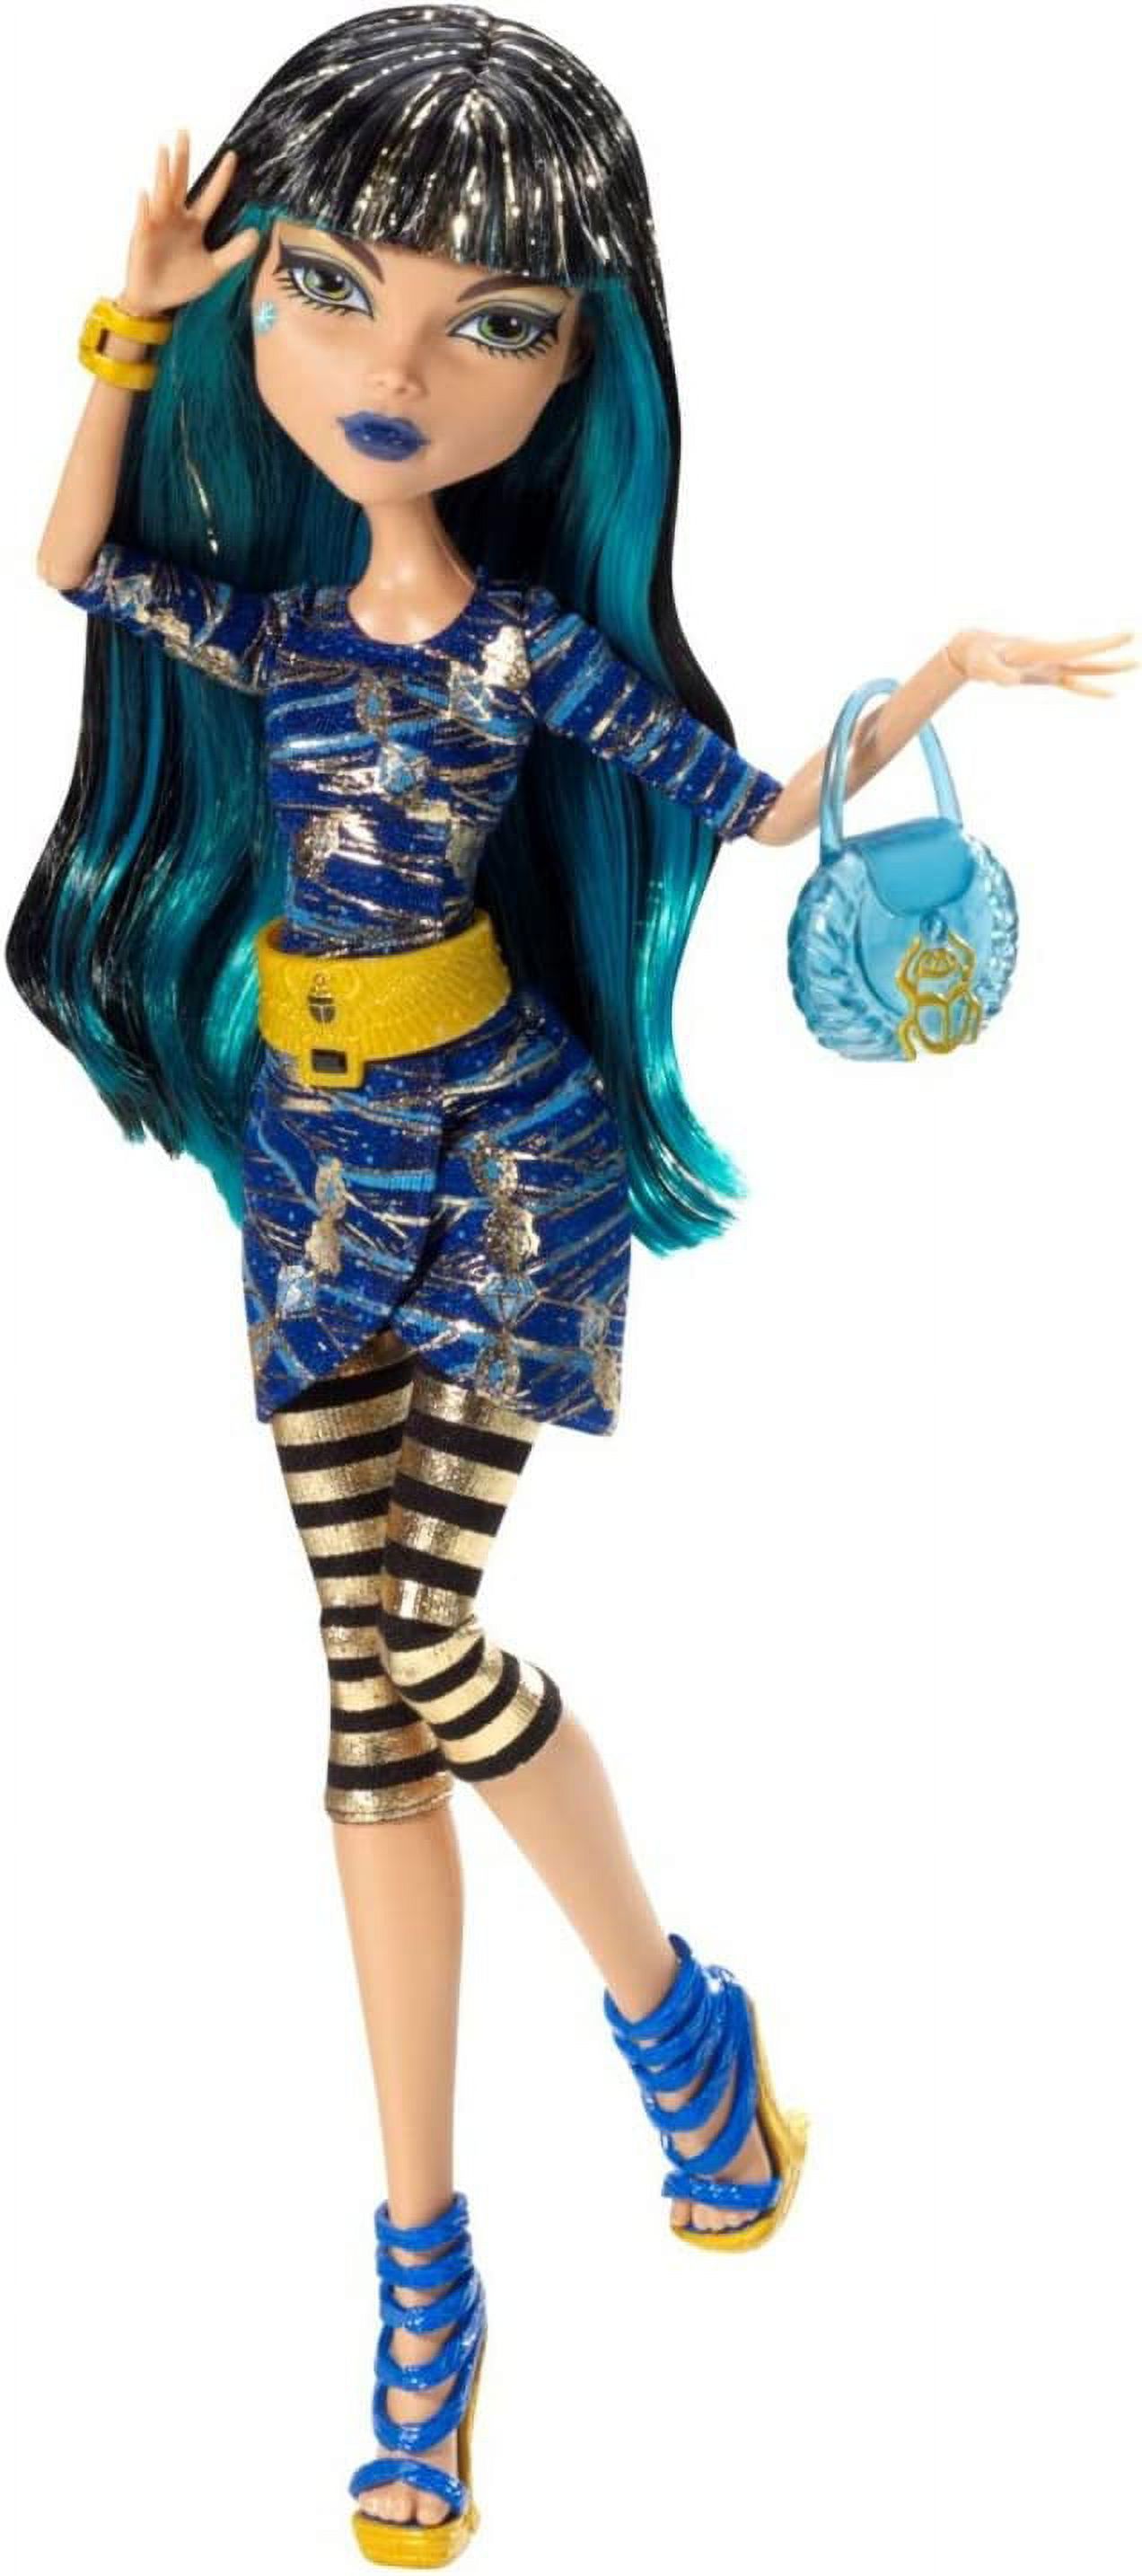 Monster High Picture Day Cleo De Nile Doll - image 4 of 7